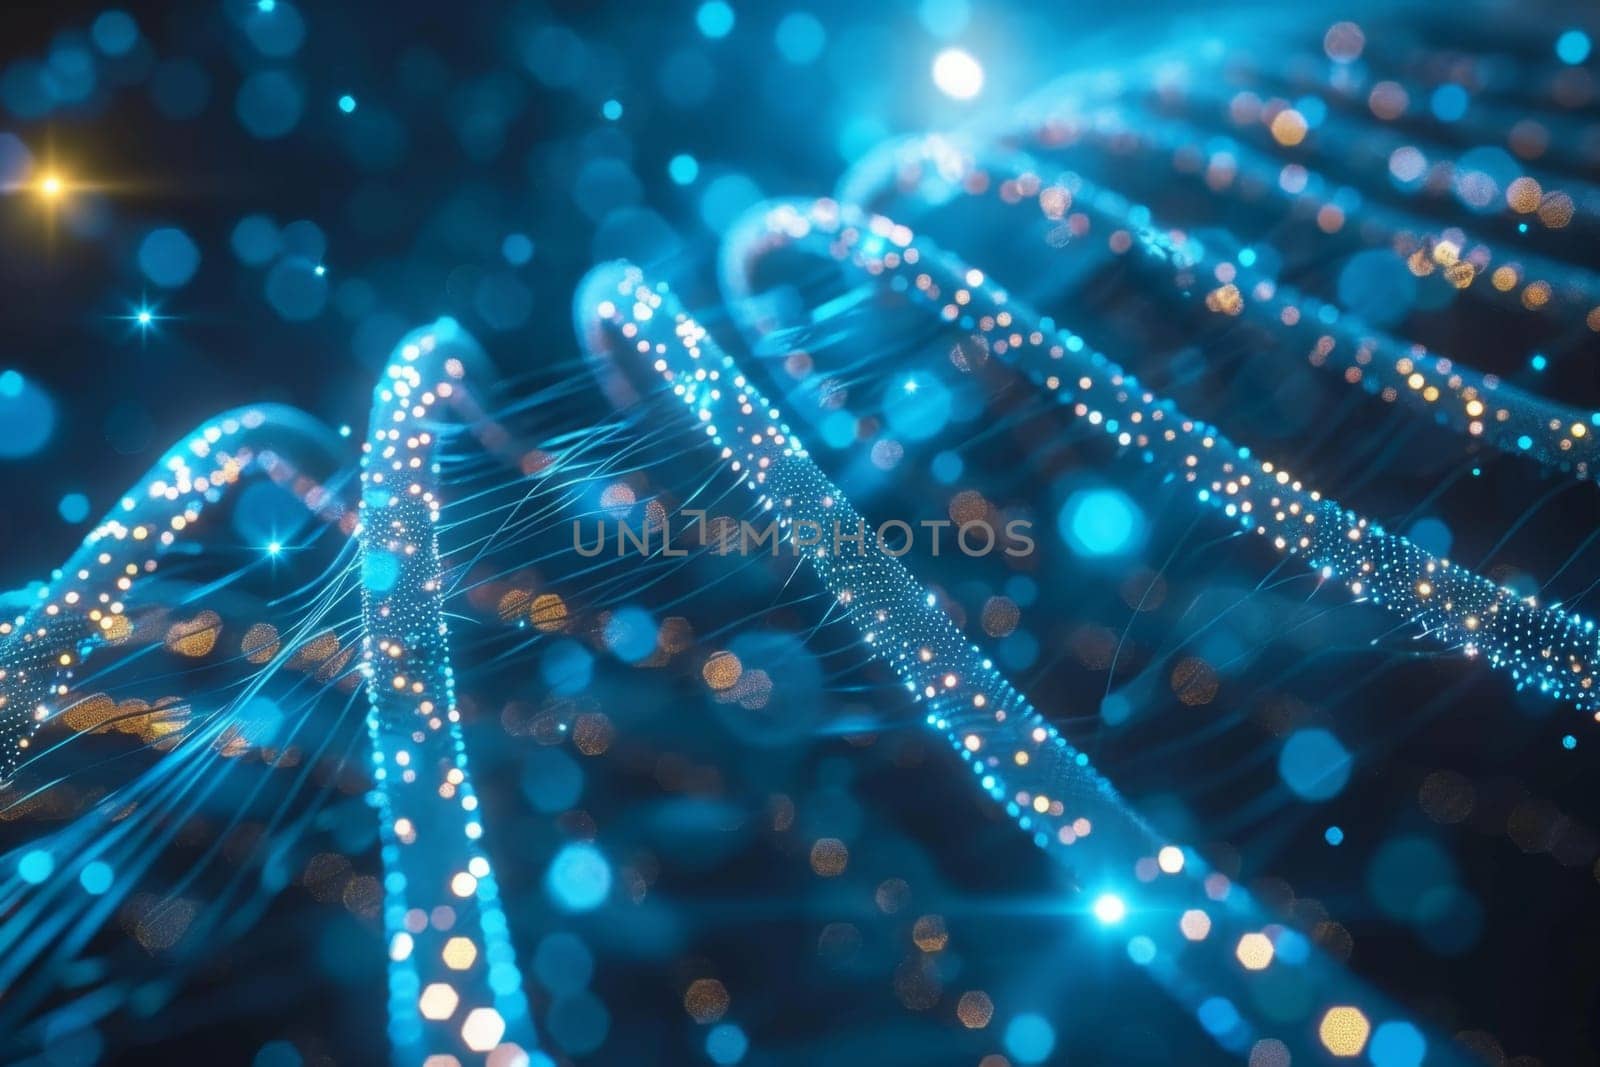 A DNA spiral on an abstract dark background. Biohacking. 3d illustration by Lobachad